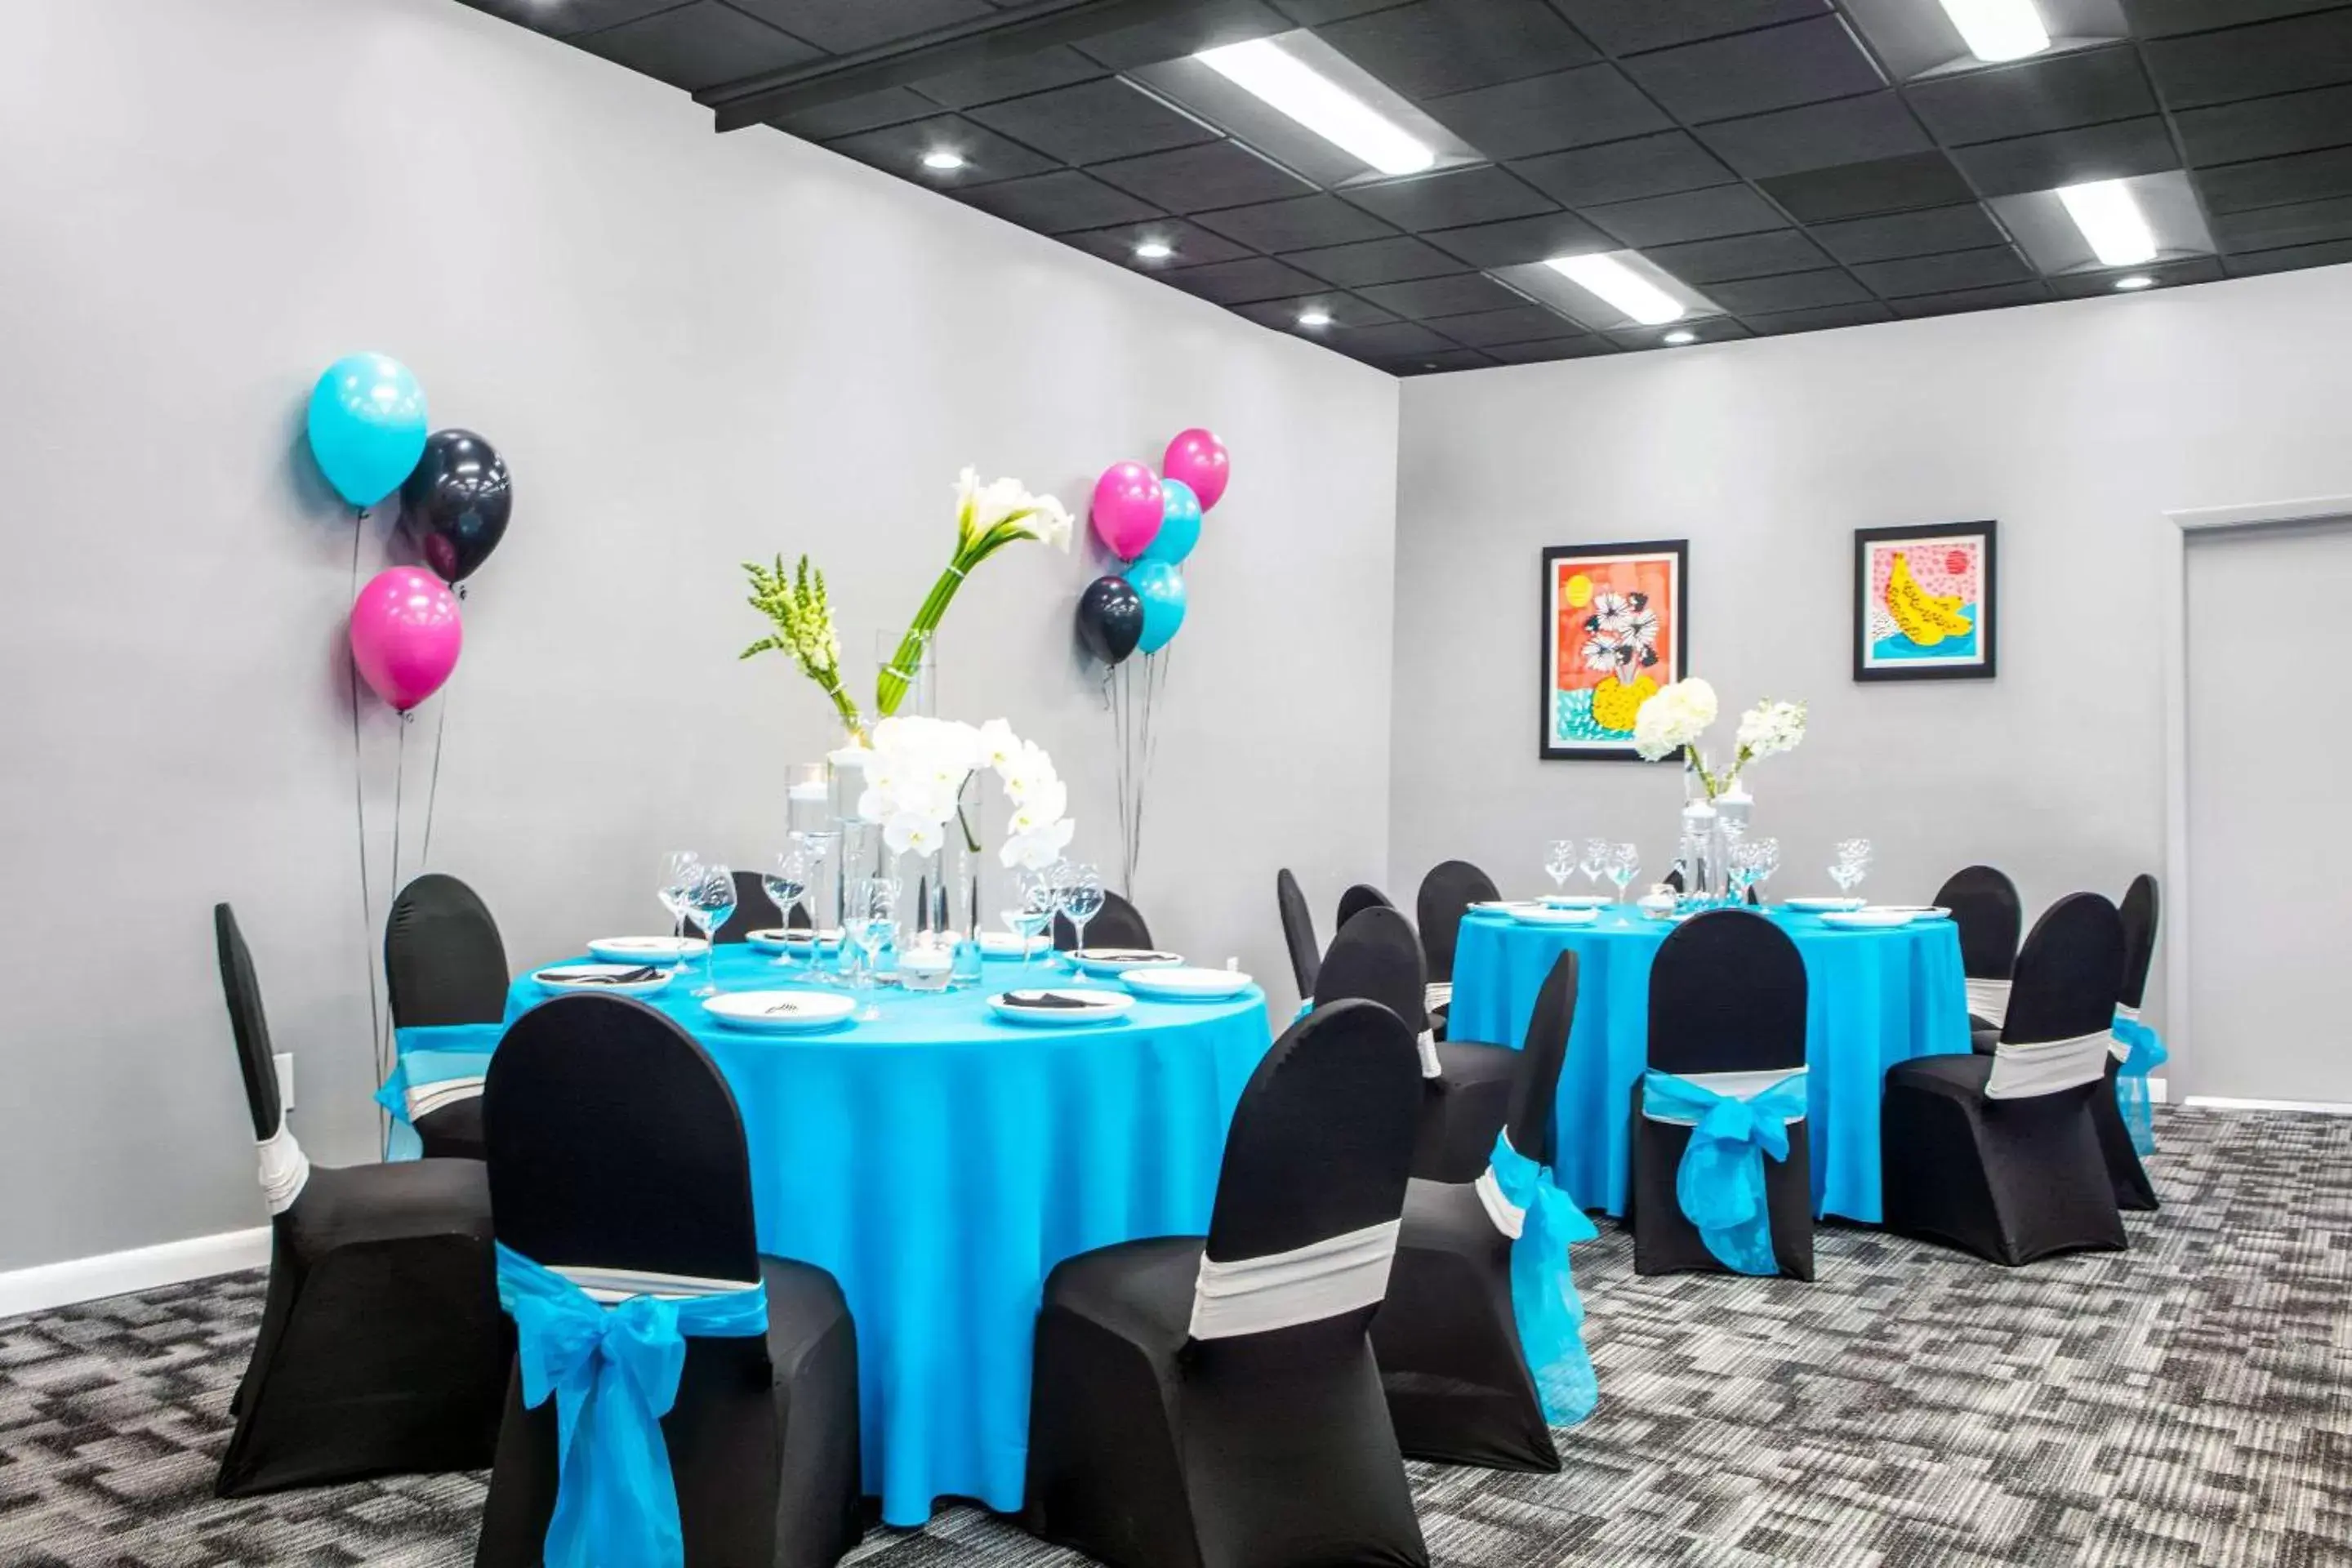 On site, Banquet Facilities in Quality Inn Miami South